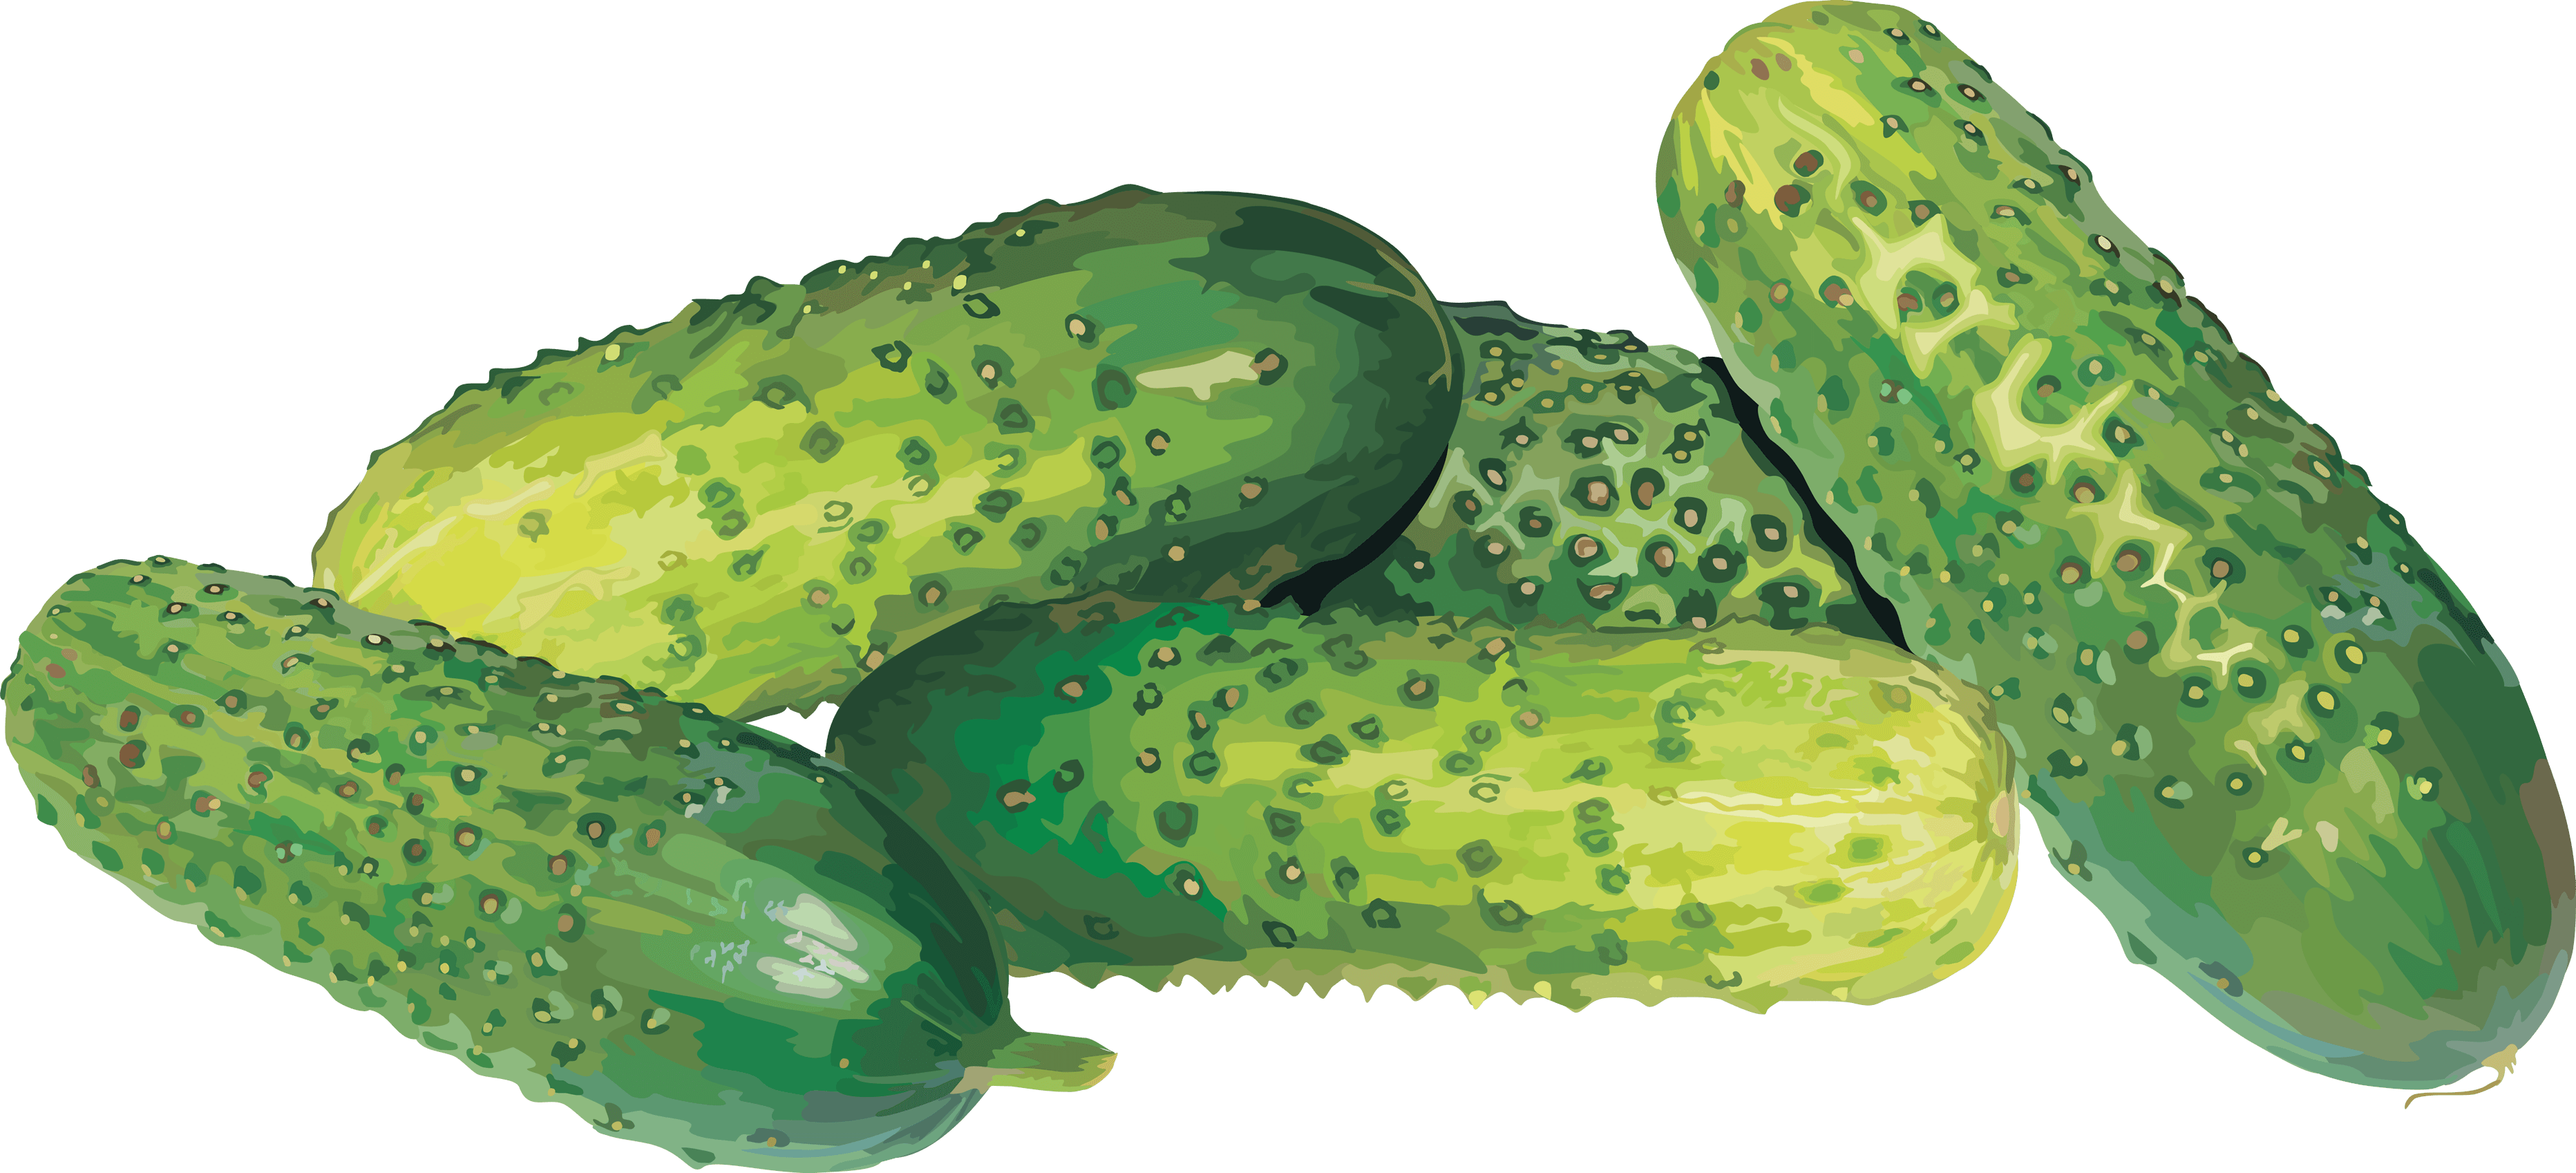 Cucumber Png Image Picture Download PNG Image